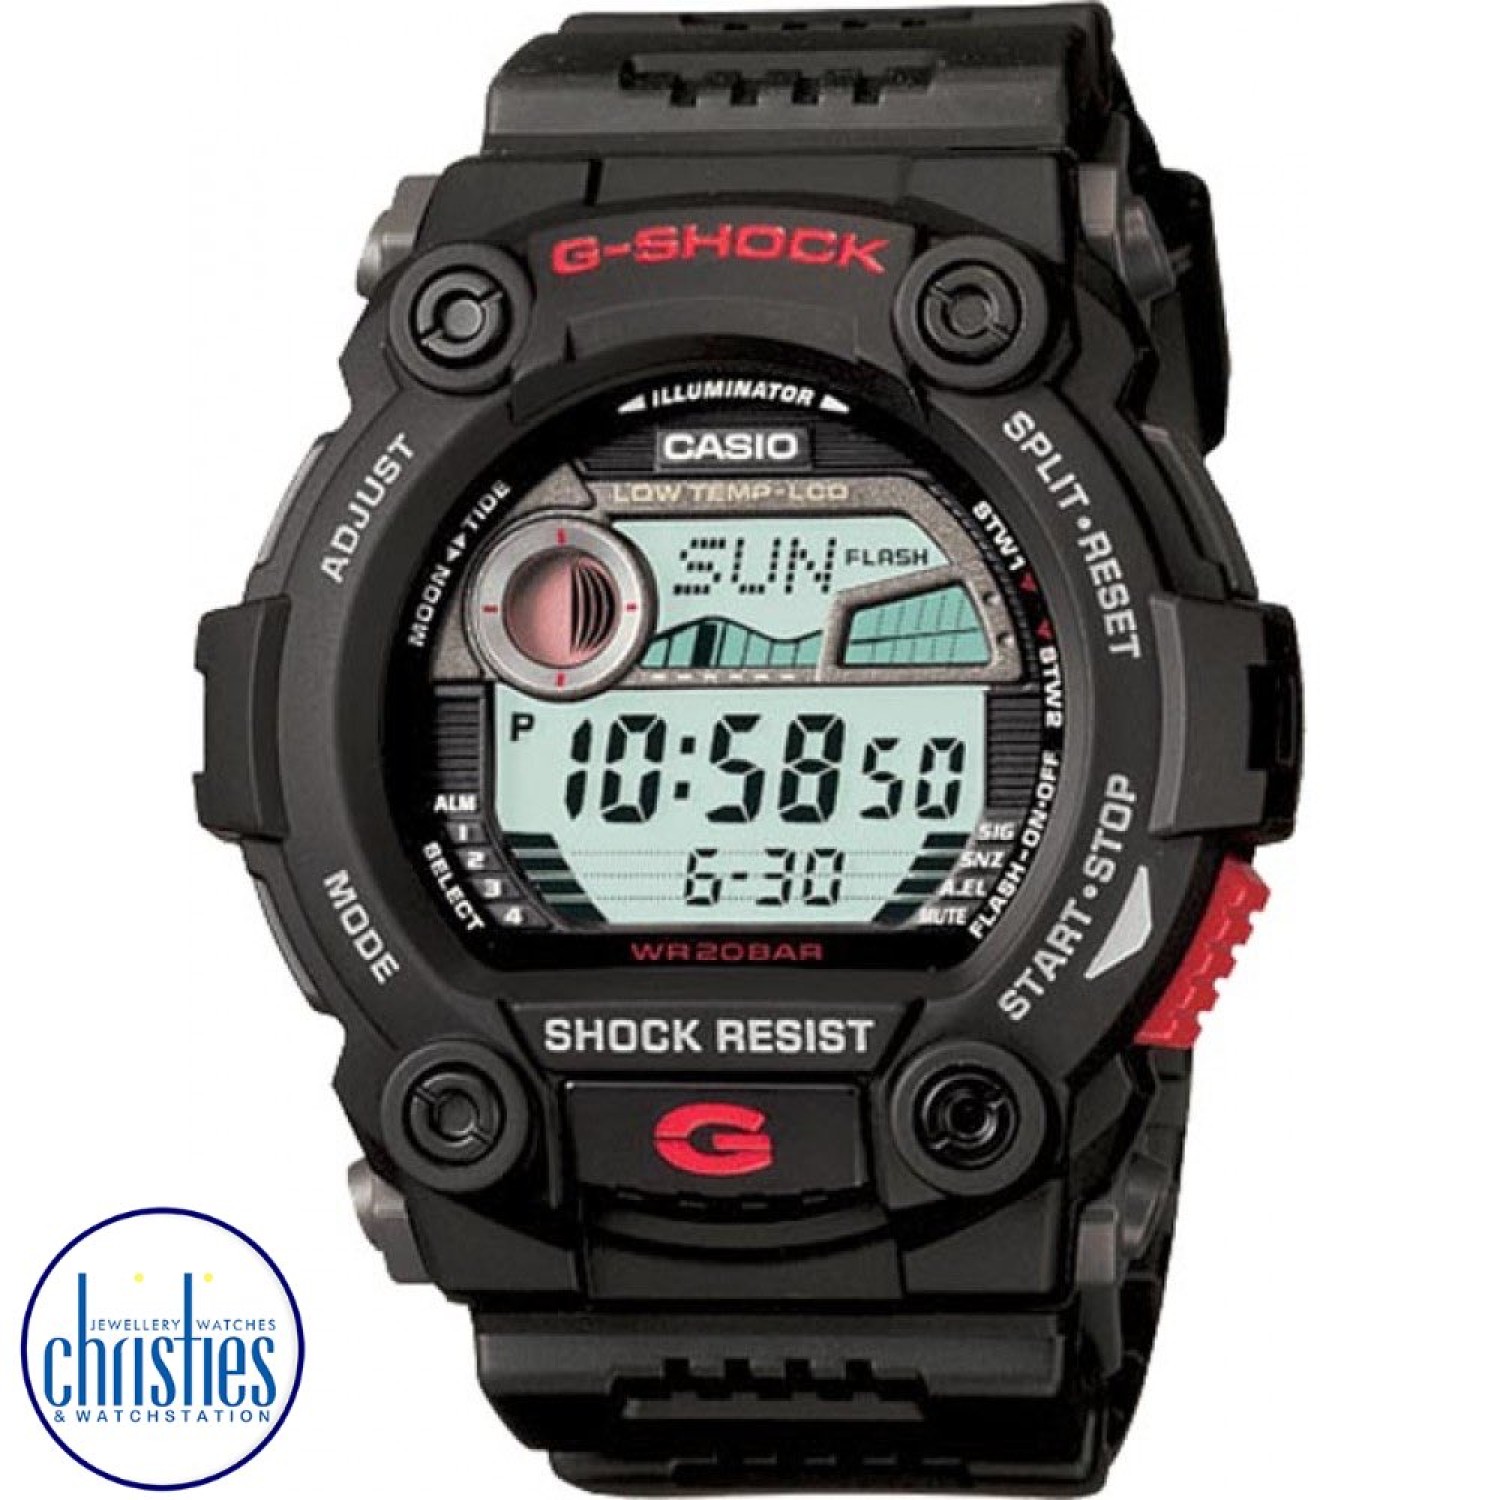 G7900-1D G-SHOCK Fishing Tide Graph Watch. From G-Shock, the watch that delivers unmatched toughness, comes a collection of new models that deliver a new level of protection. These watches are designed and engineered for rough and rugged activities. Digit